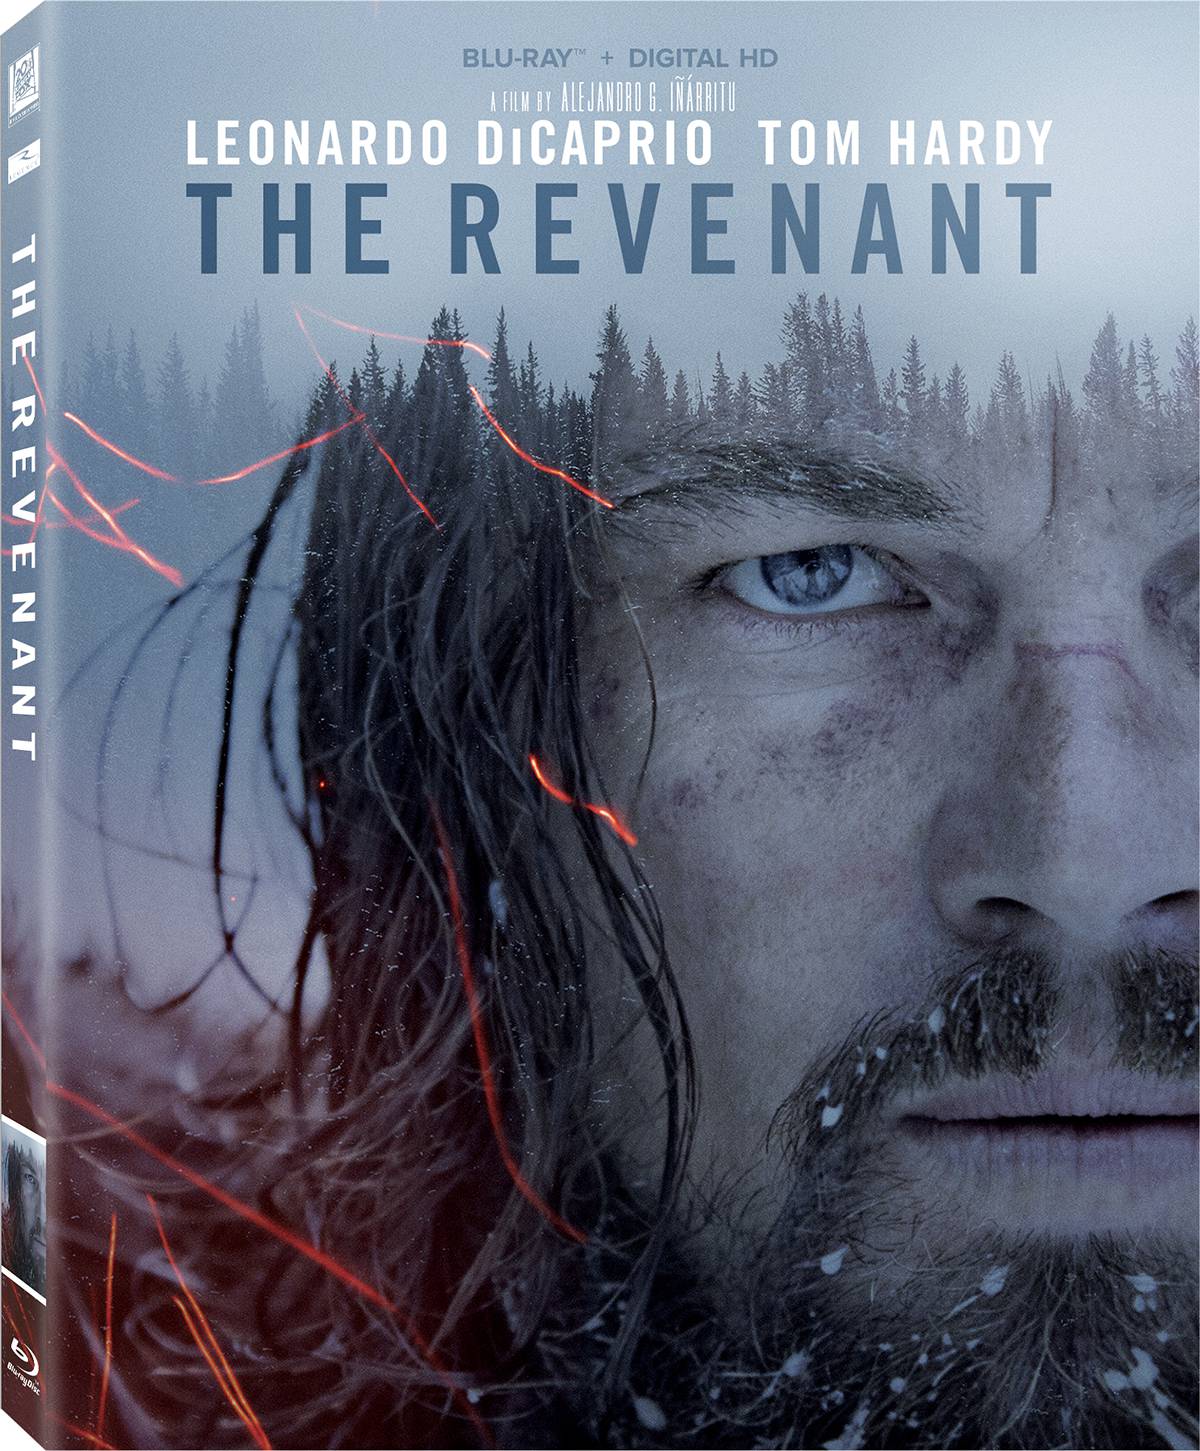 The Revenant Blu-ray Review, The Revenant | FlickDirect